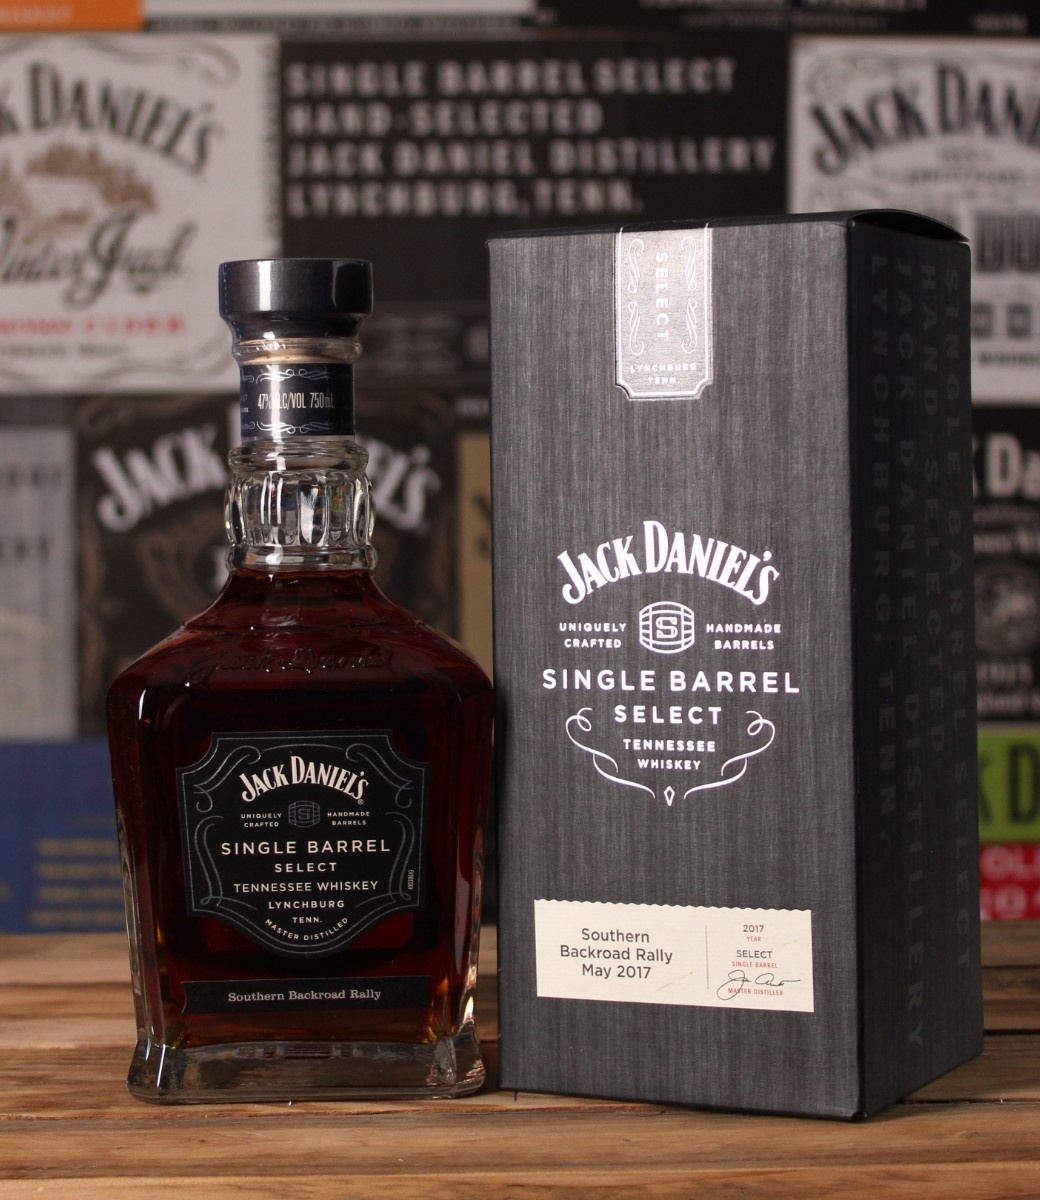 JACK DANIEL'S - Single Barrel - Personal Collection - S Backroad Rally